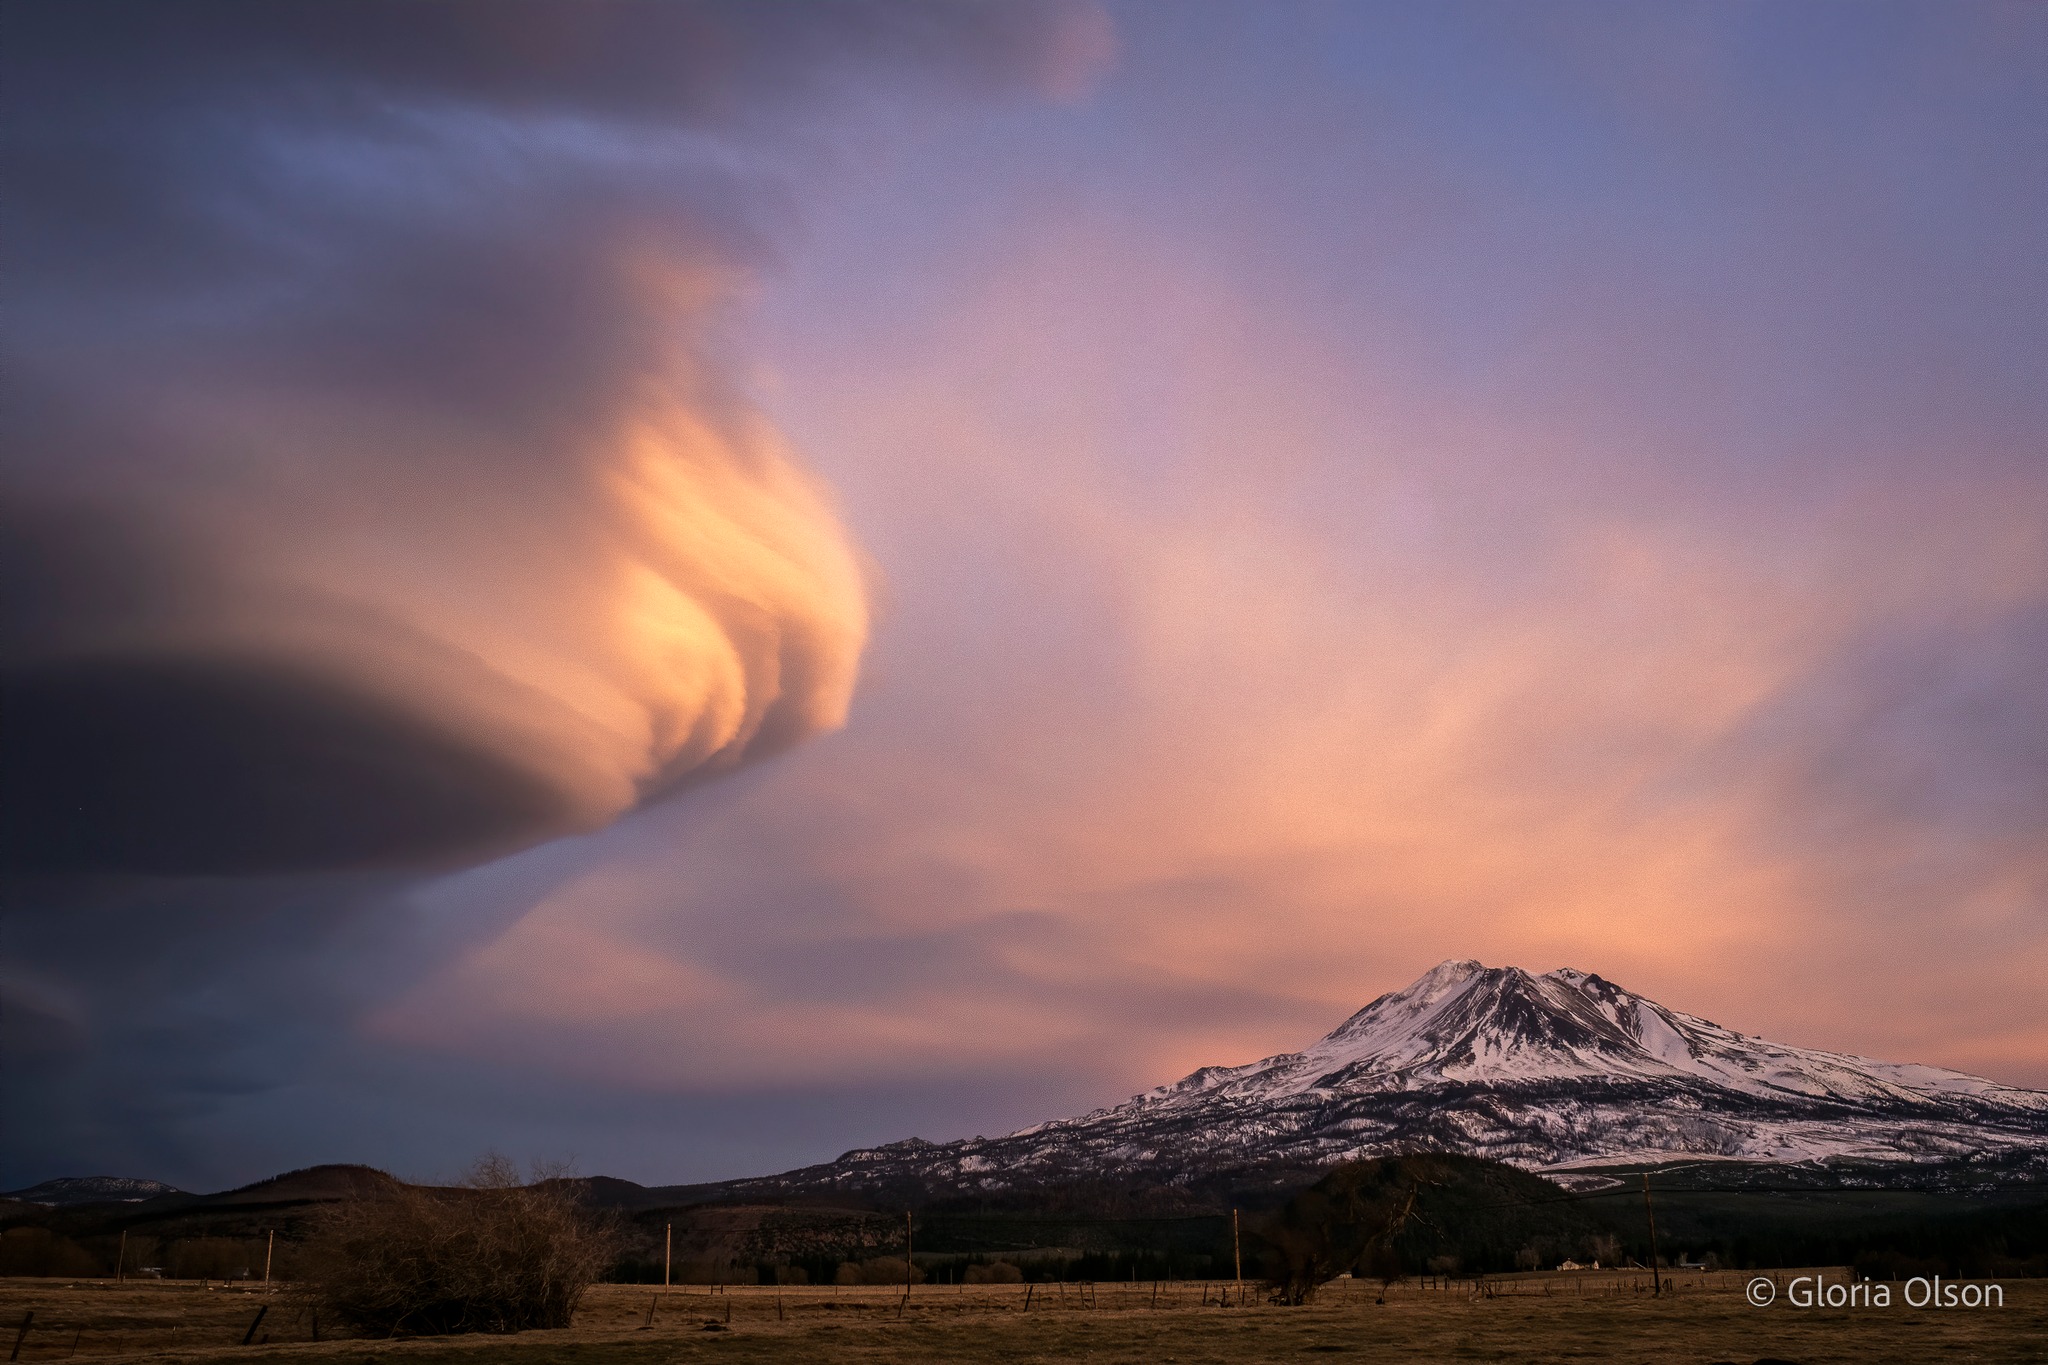 lenticular cloud was hovering next to Mount Shasta 